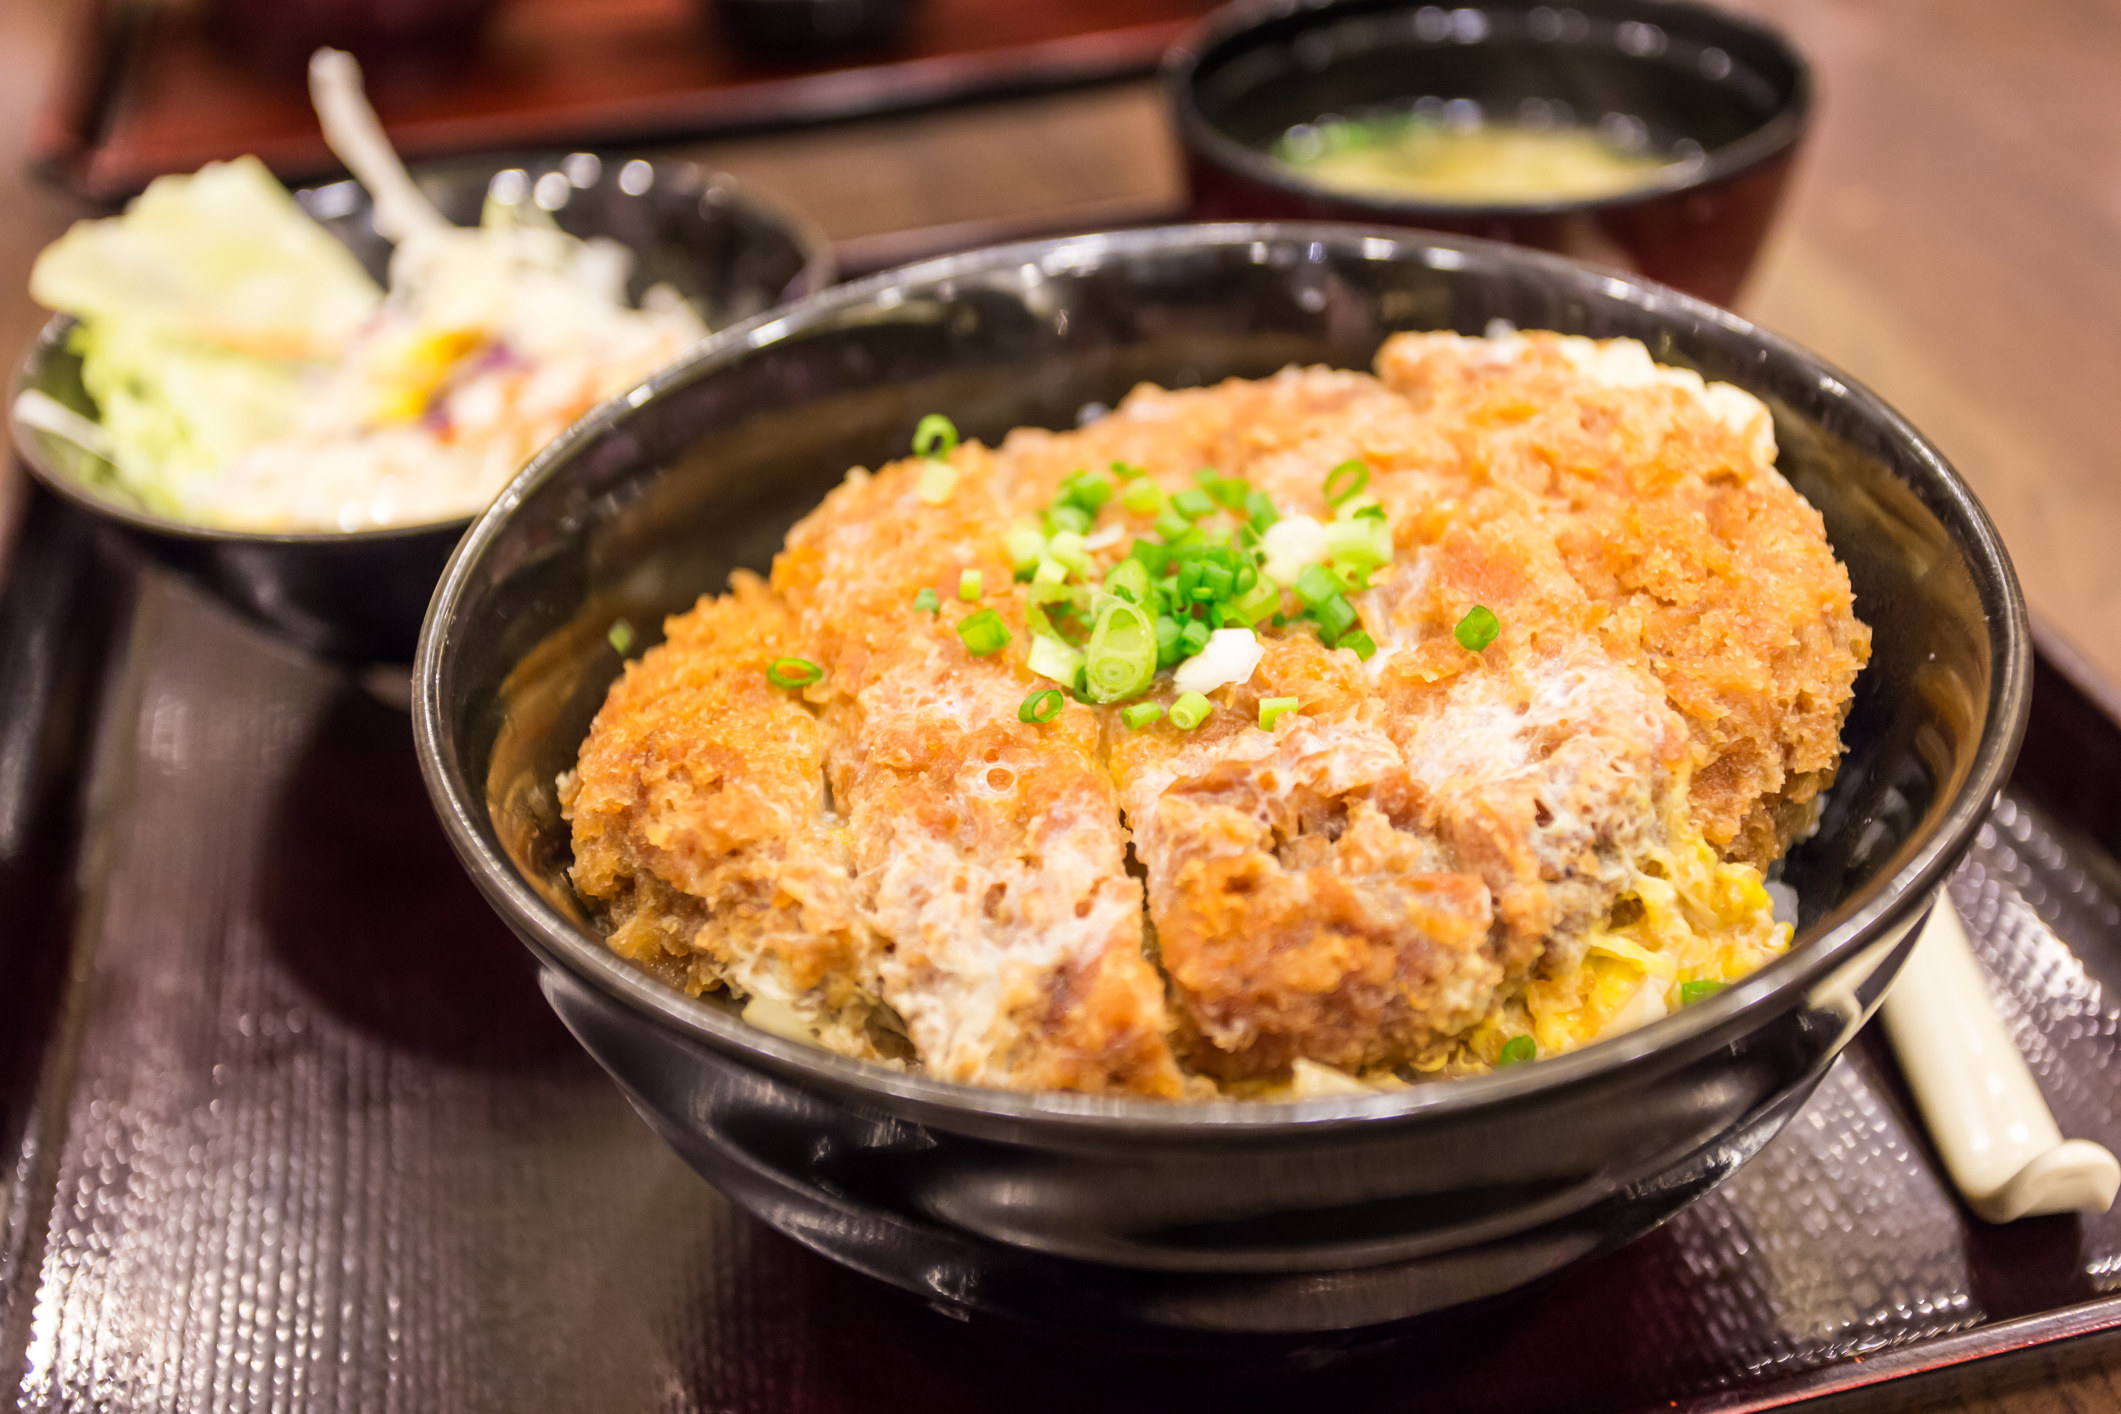 Japanese breaded deep-fried pork cutlet topped with egg on steamed rice